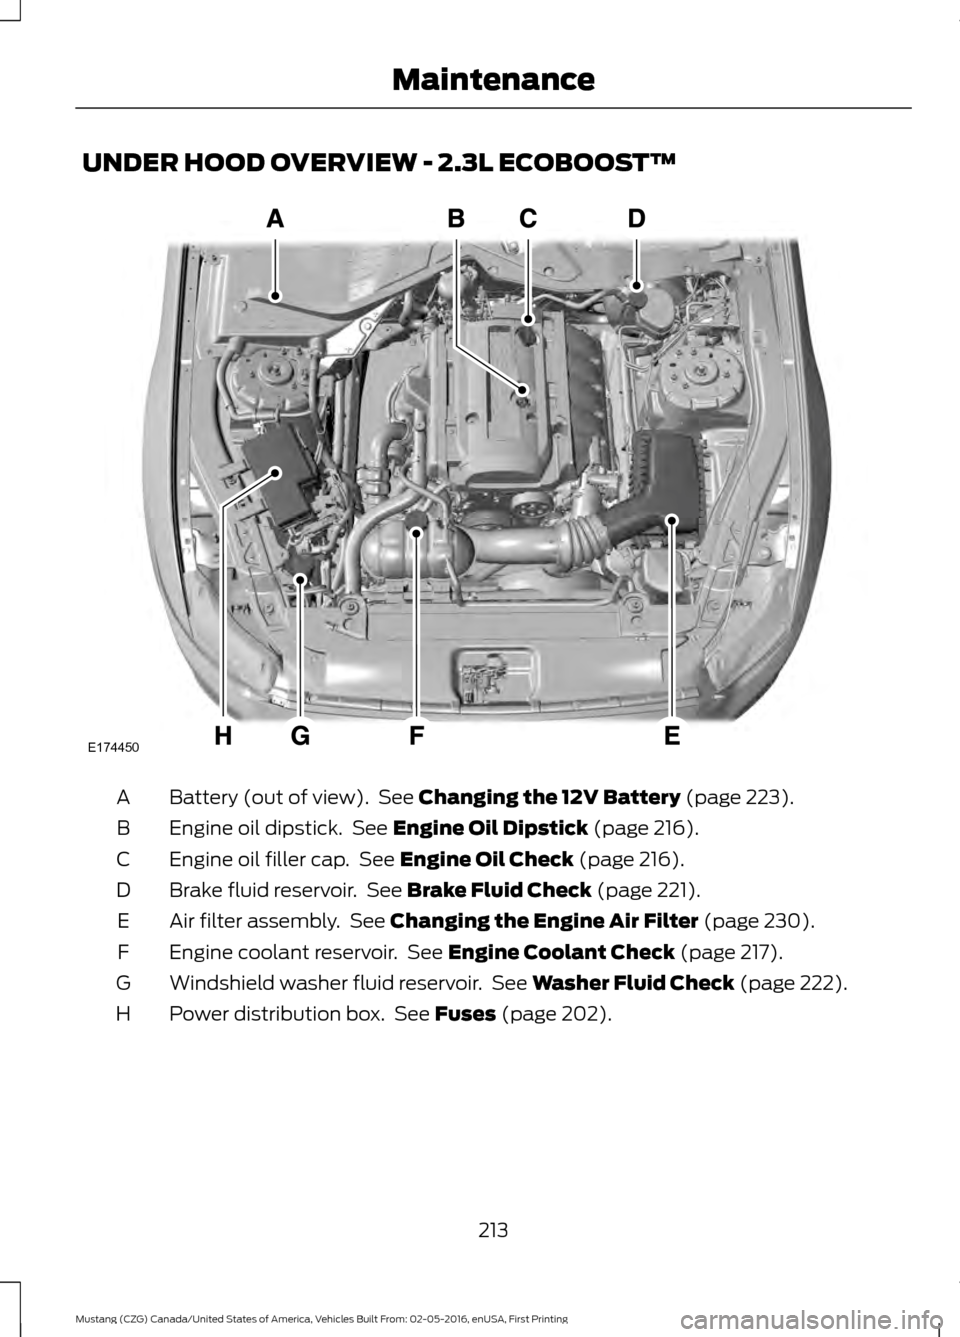 FORD MUSTANG 2017 6.G Owners Manual UNDER HOOD OVERVIEW - 2.3L ECOBOOST™
Battery (out of view).  See Changing the 12V Battery (page 223).
A
Engine oil dipstick.  See 
Engine Oil Dipstick (page 216).
B
Engine oil filler cap.  See 
Engi